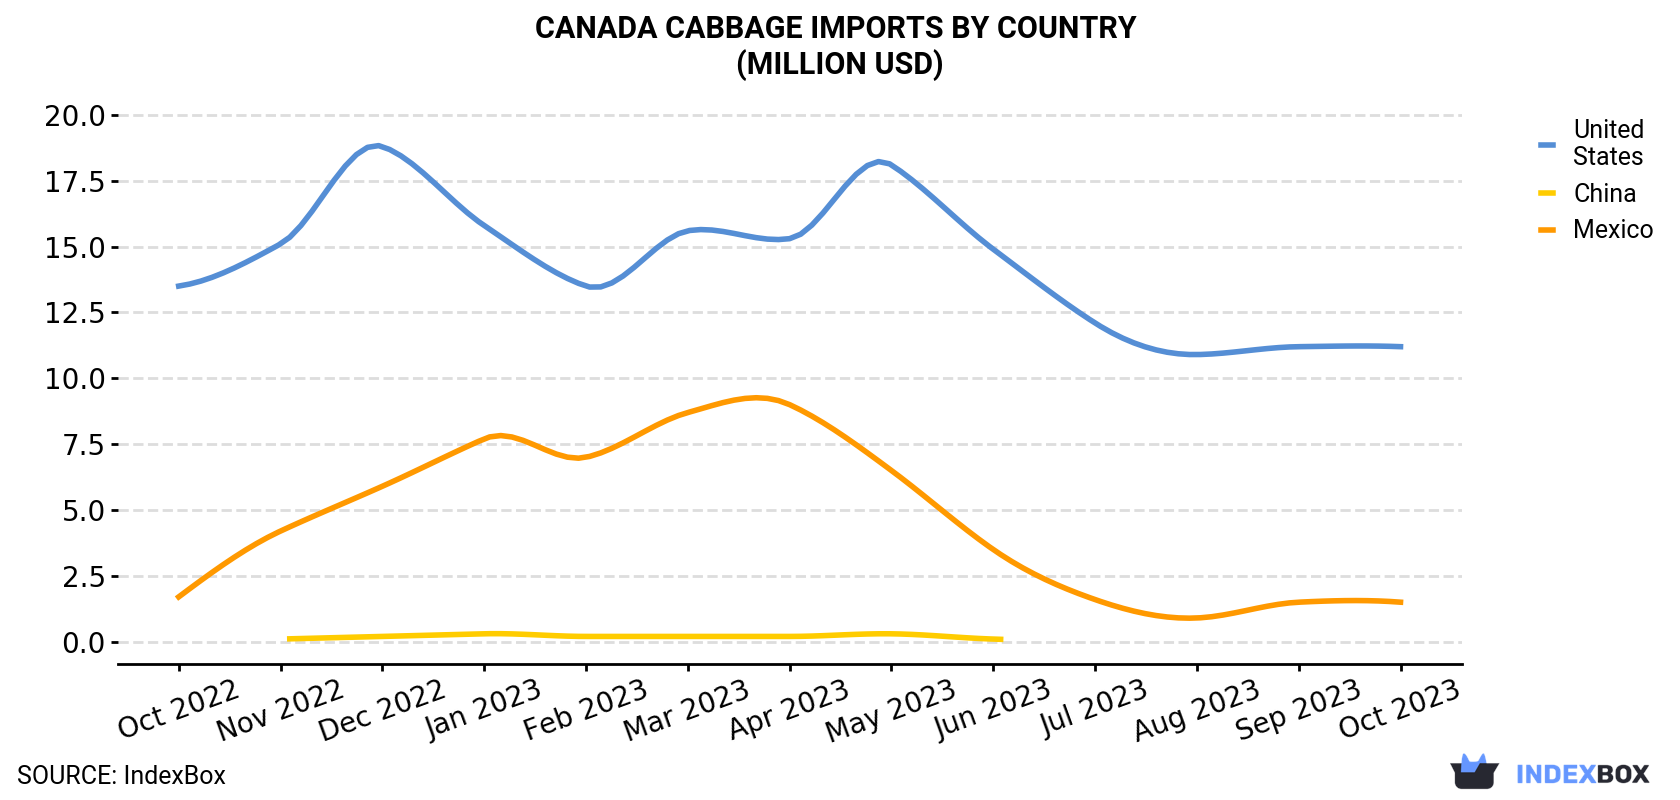 Canada Cabbage Imports By Country (Million USD)